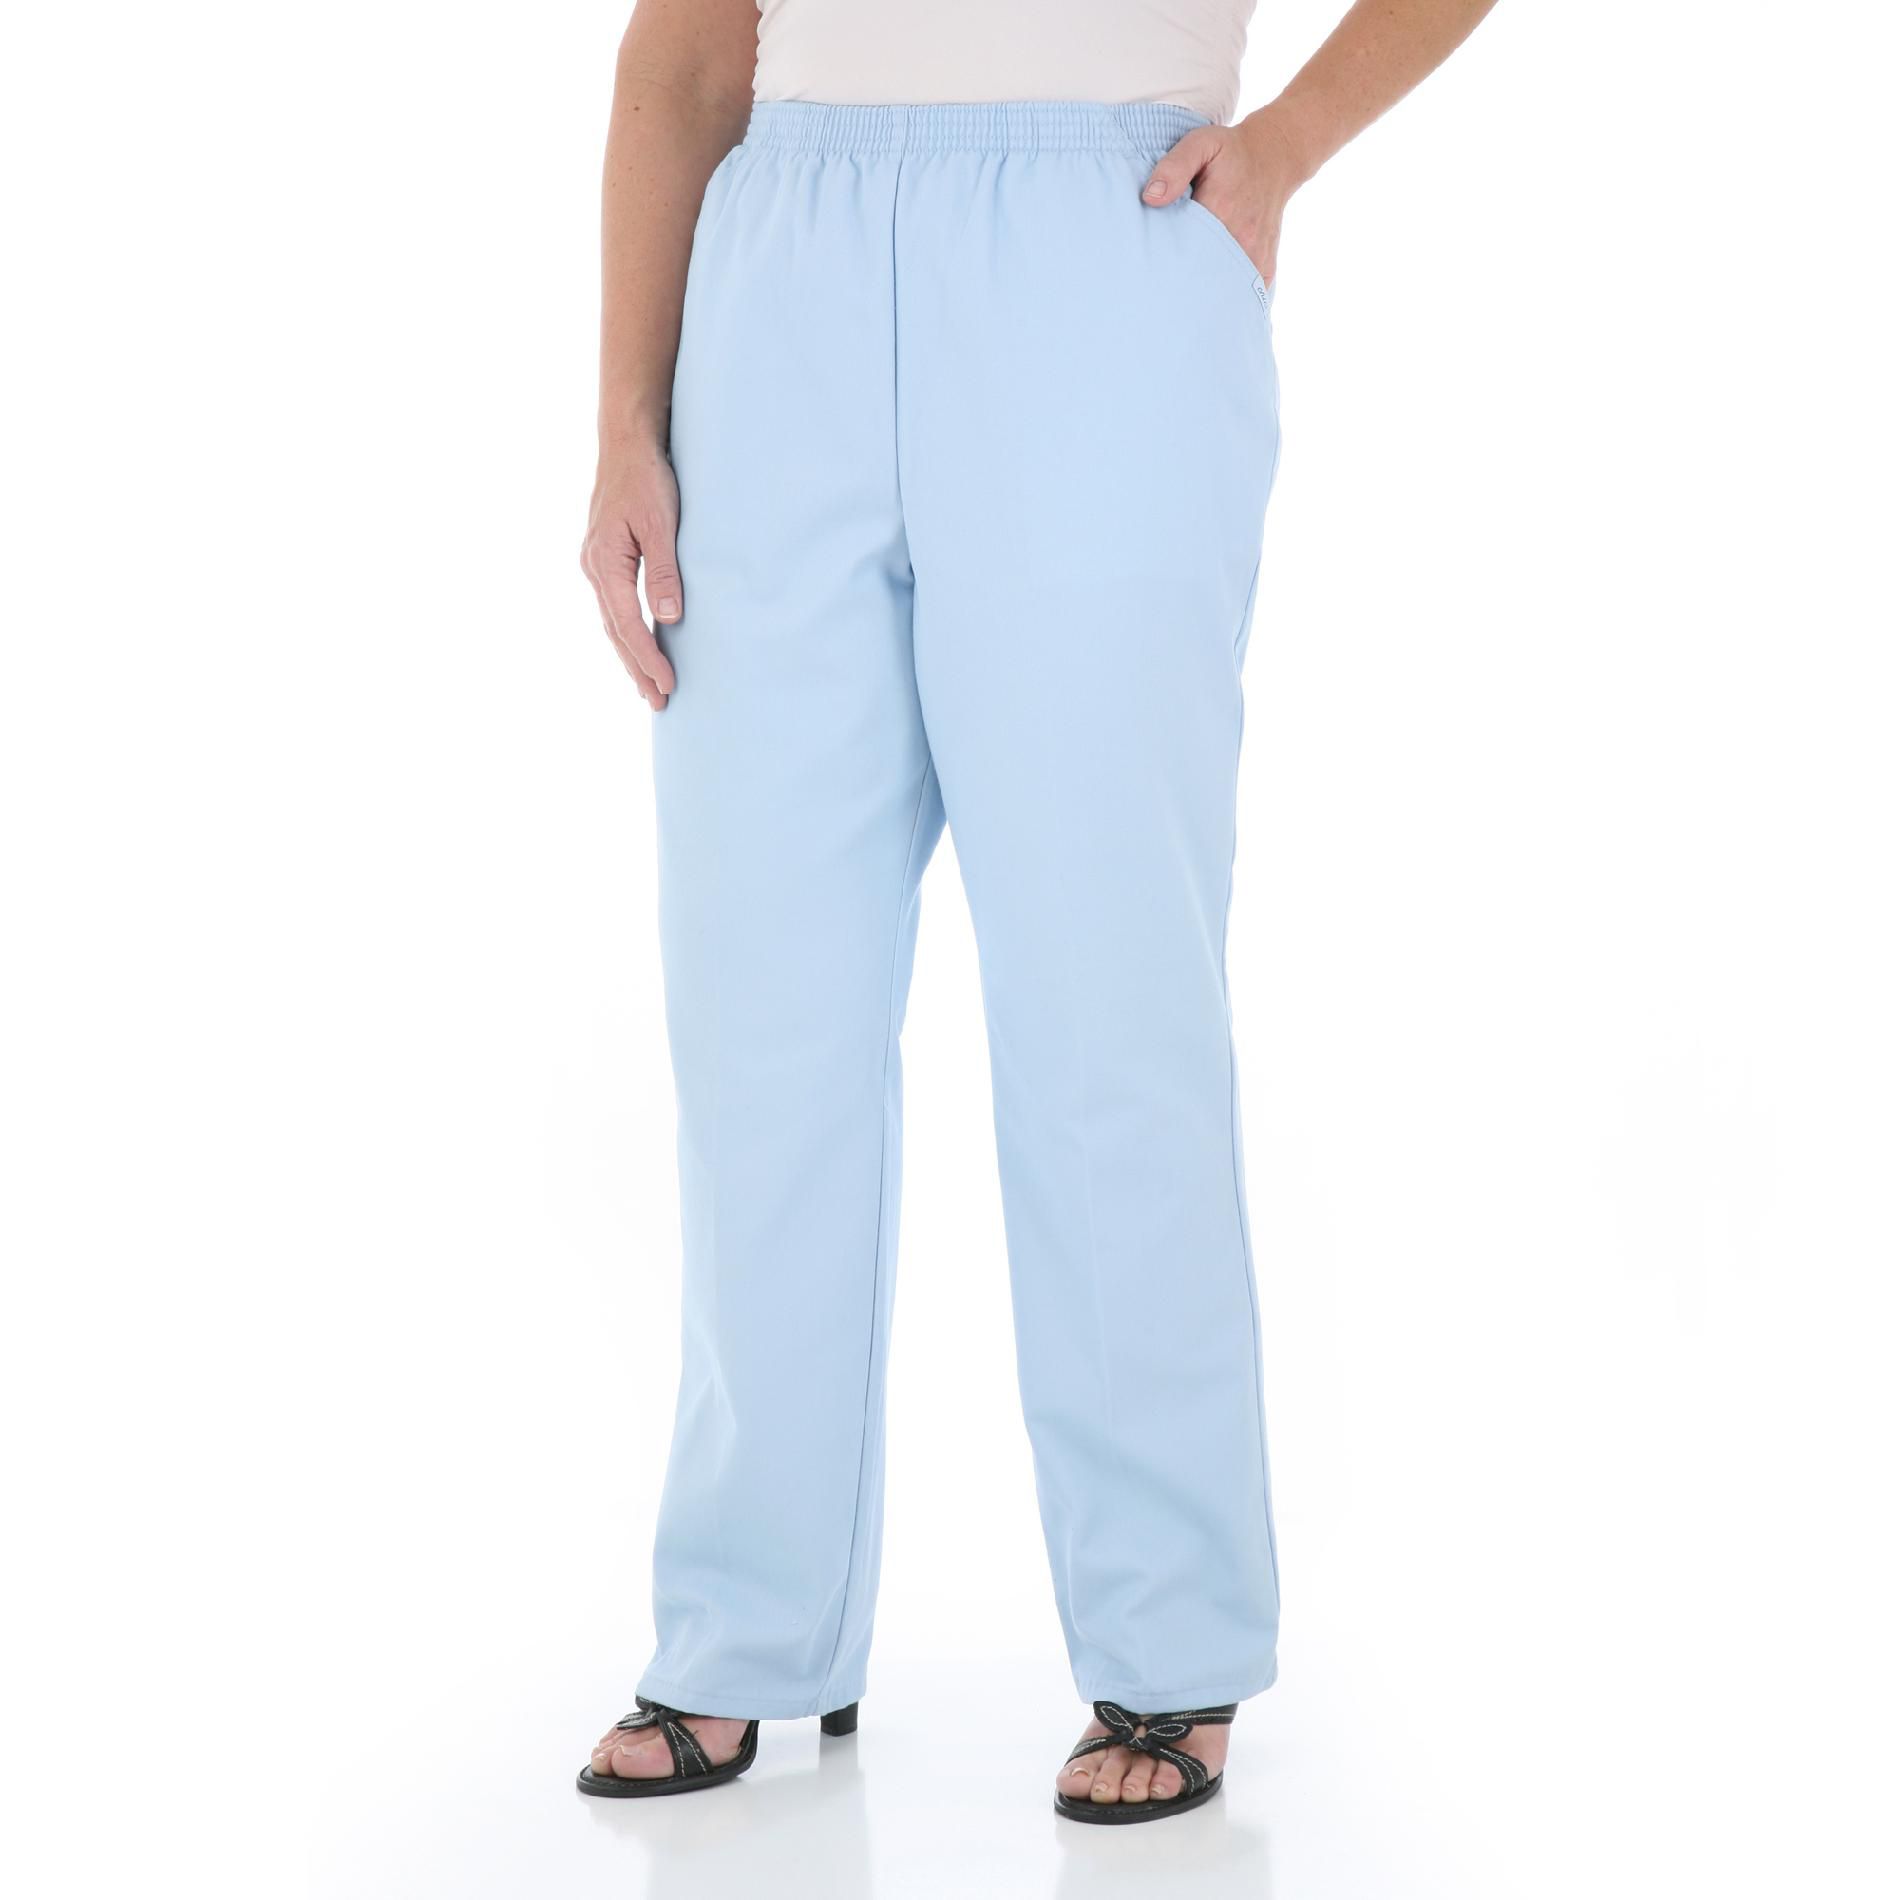 Chic Women's Pull-On Pants